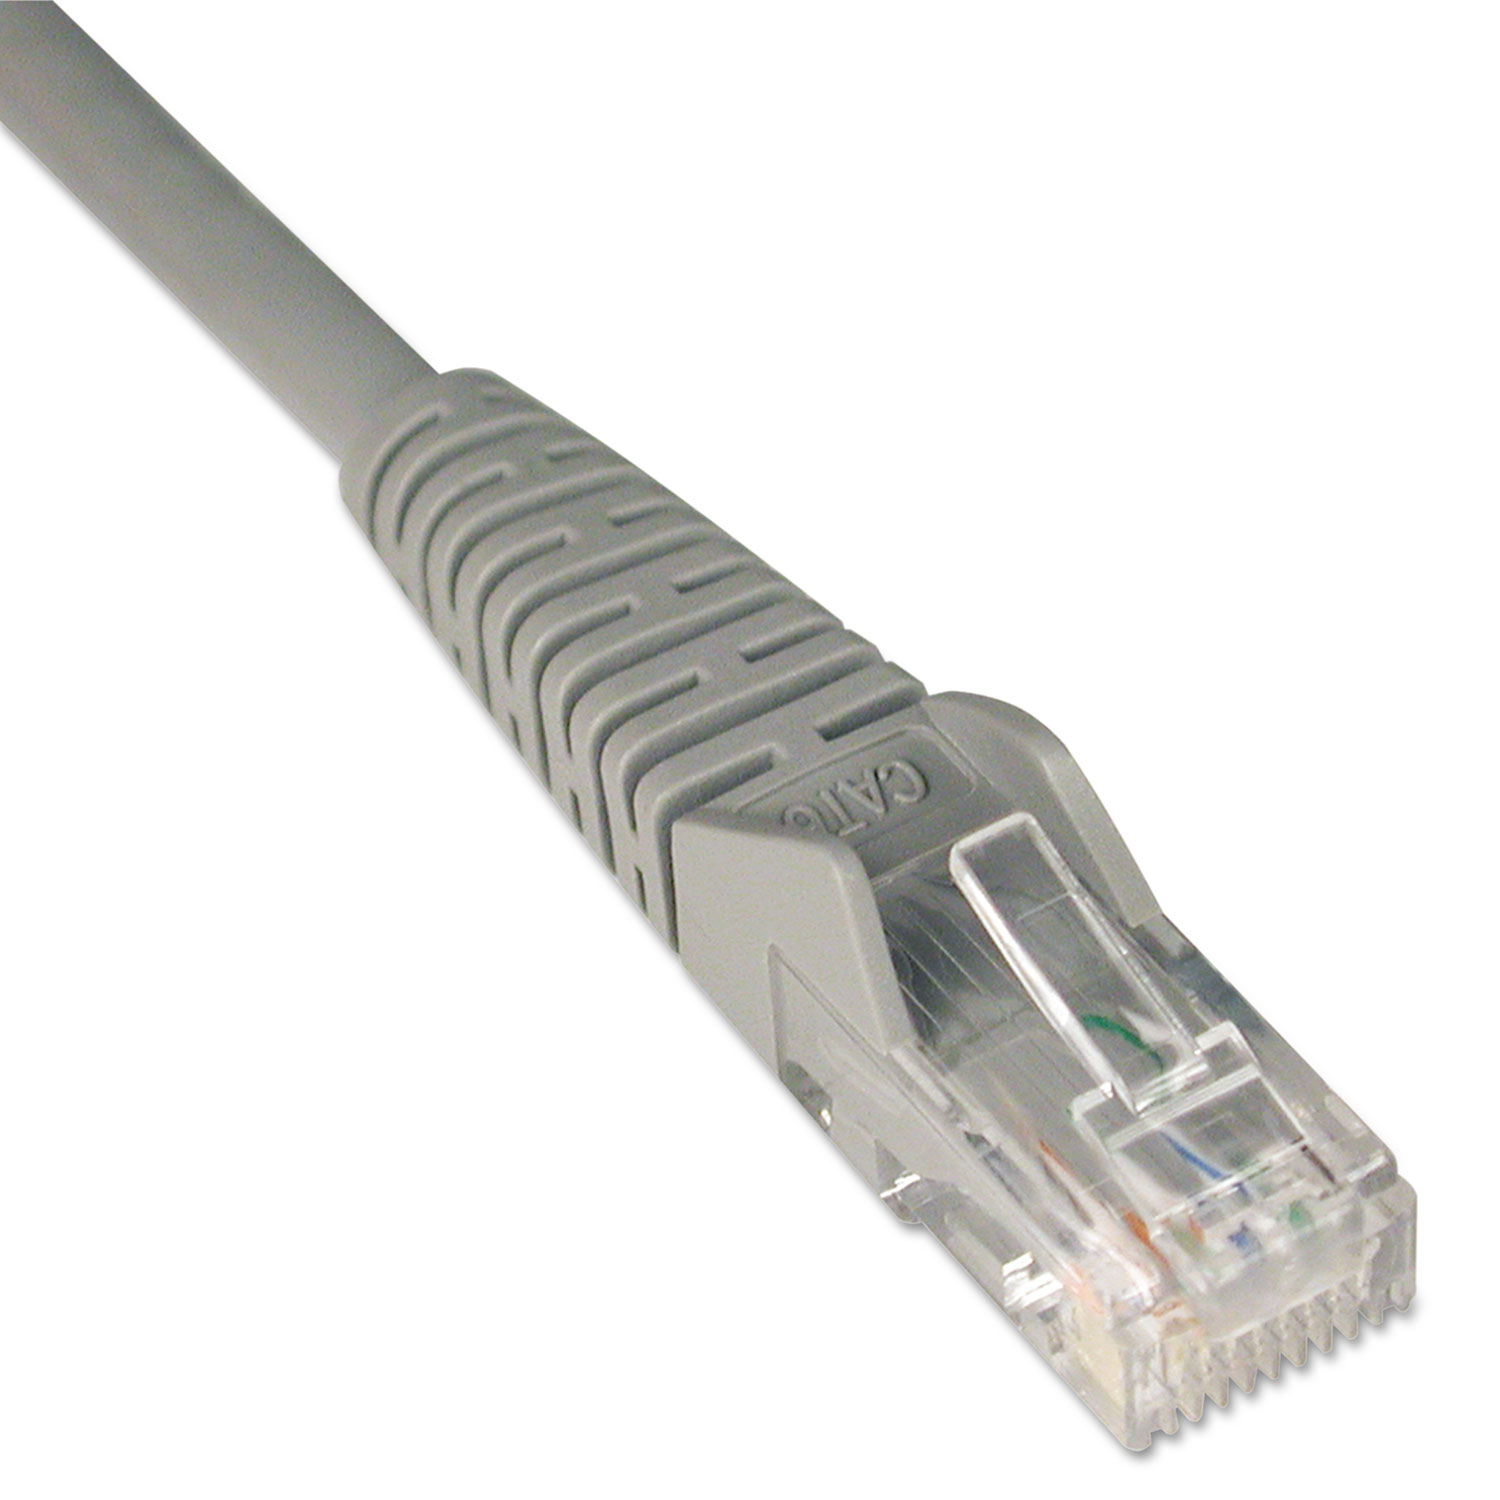  Tripp Lite N201-007-GY Cat6 Gigabit Snagless Molded Patch Cable, RJ45 (M/M), 7 ft., Gray (TRPN201007GY) 